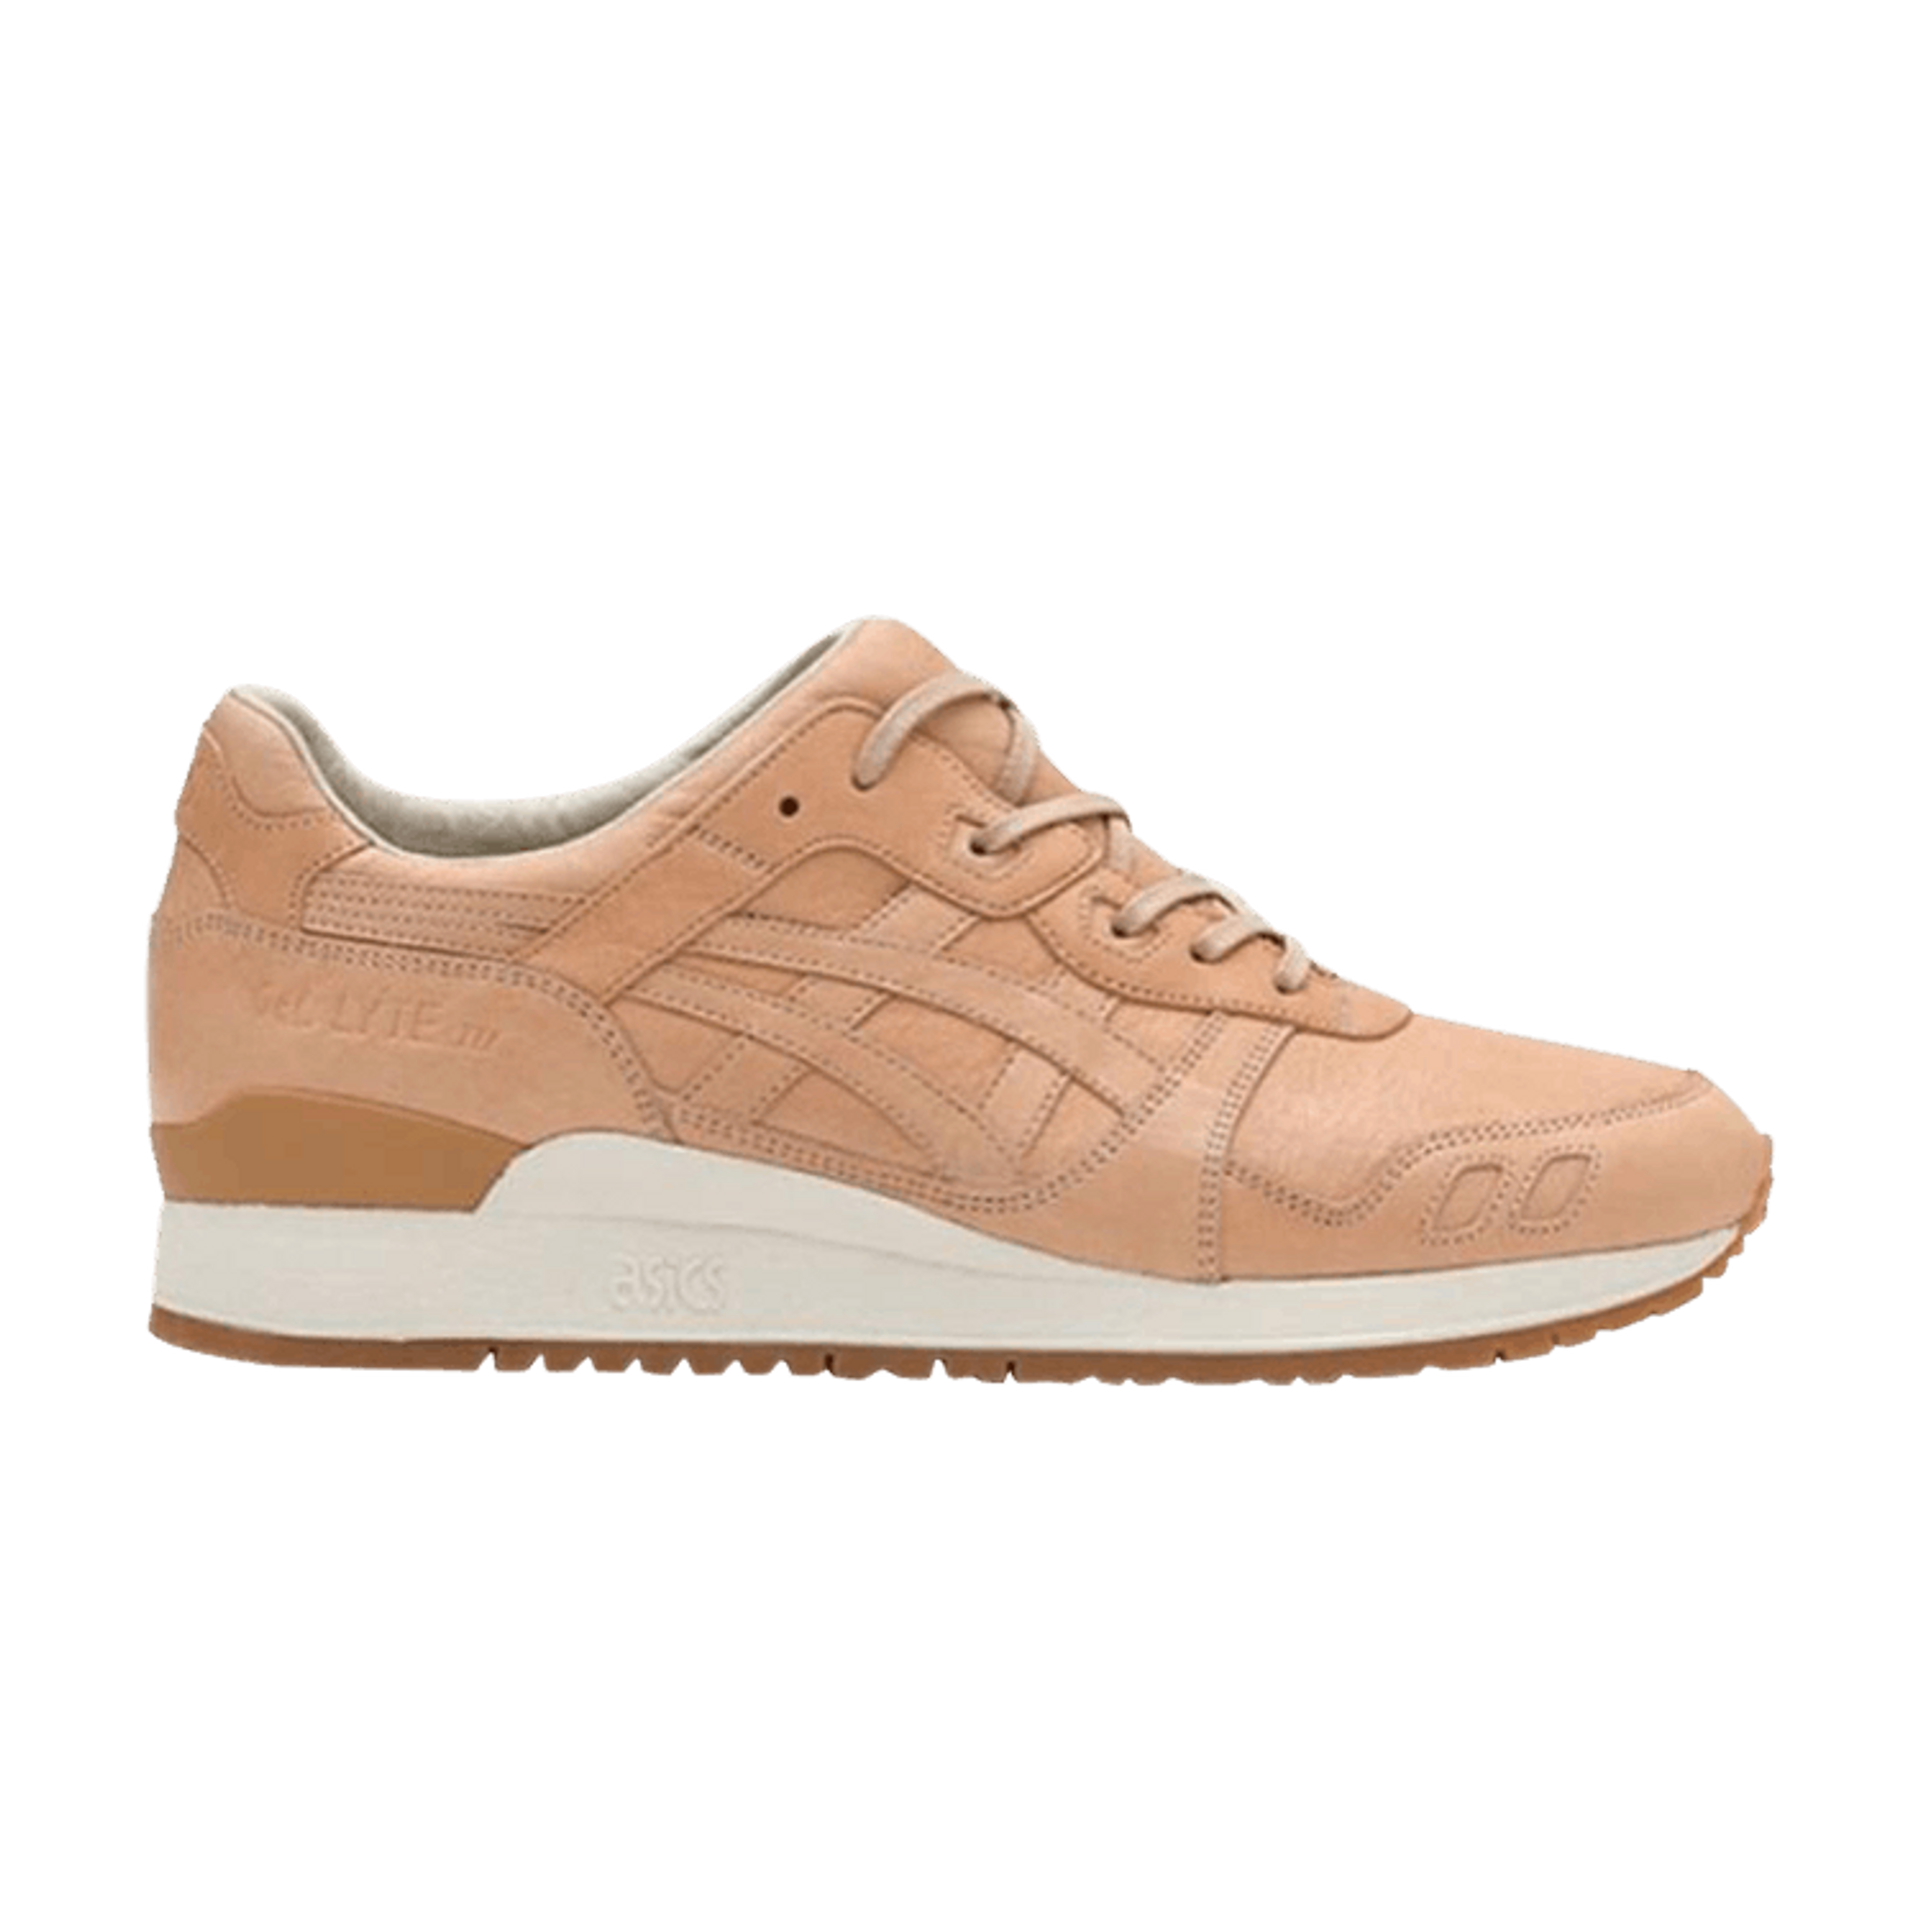 Gel Lyte 3 Made In Japan 'Vegetable Tanned Leather'